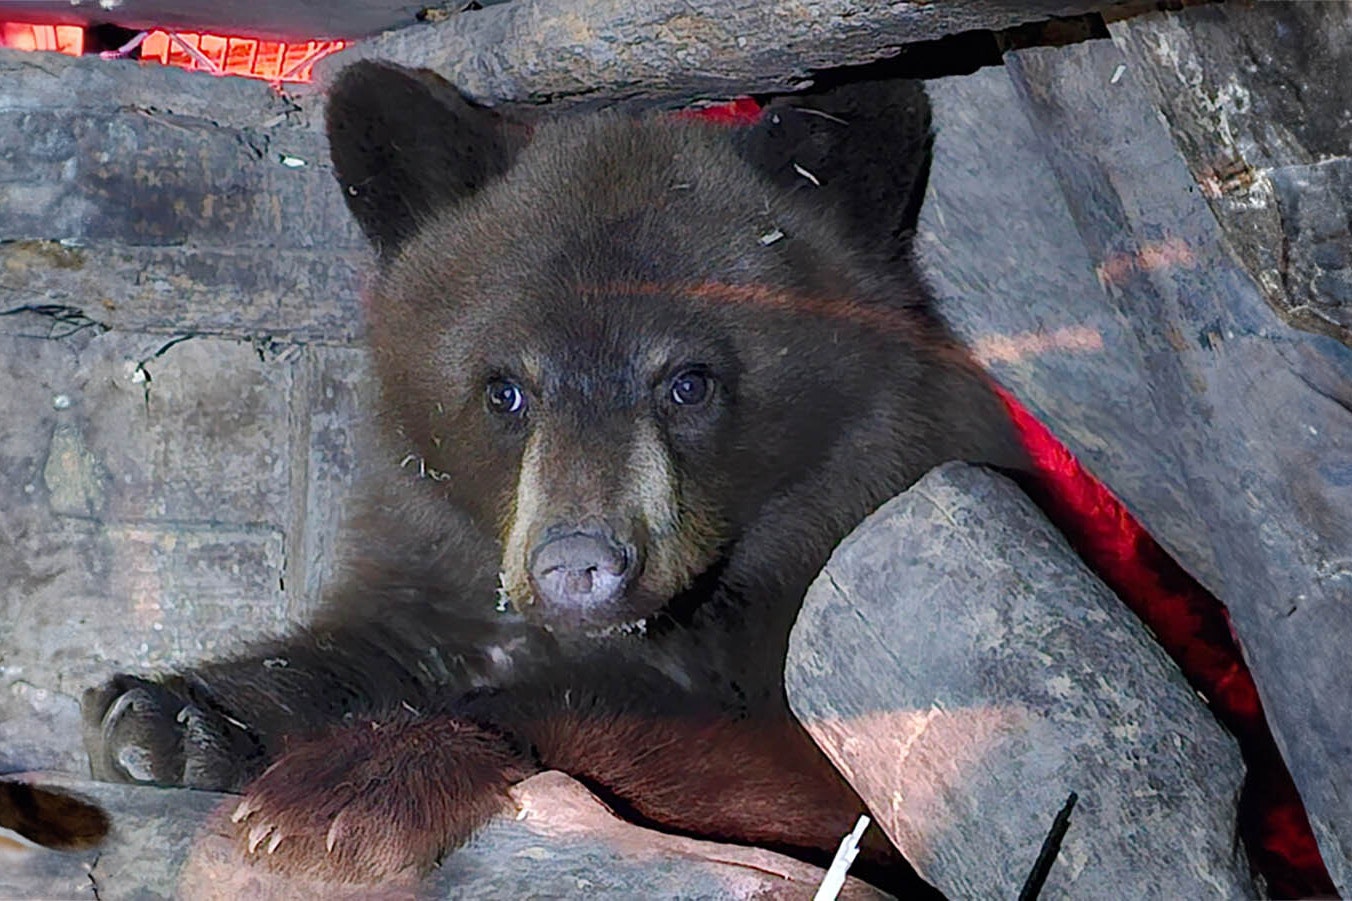 An orphaned Wyoming black bear cub named Alice was severely malnourished when she arrived at the Idaho Black Bear Rehab facility last December. Now she’s healthy, frisky and almost ready to return to Wyoming.